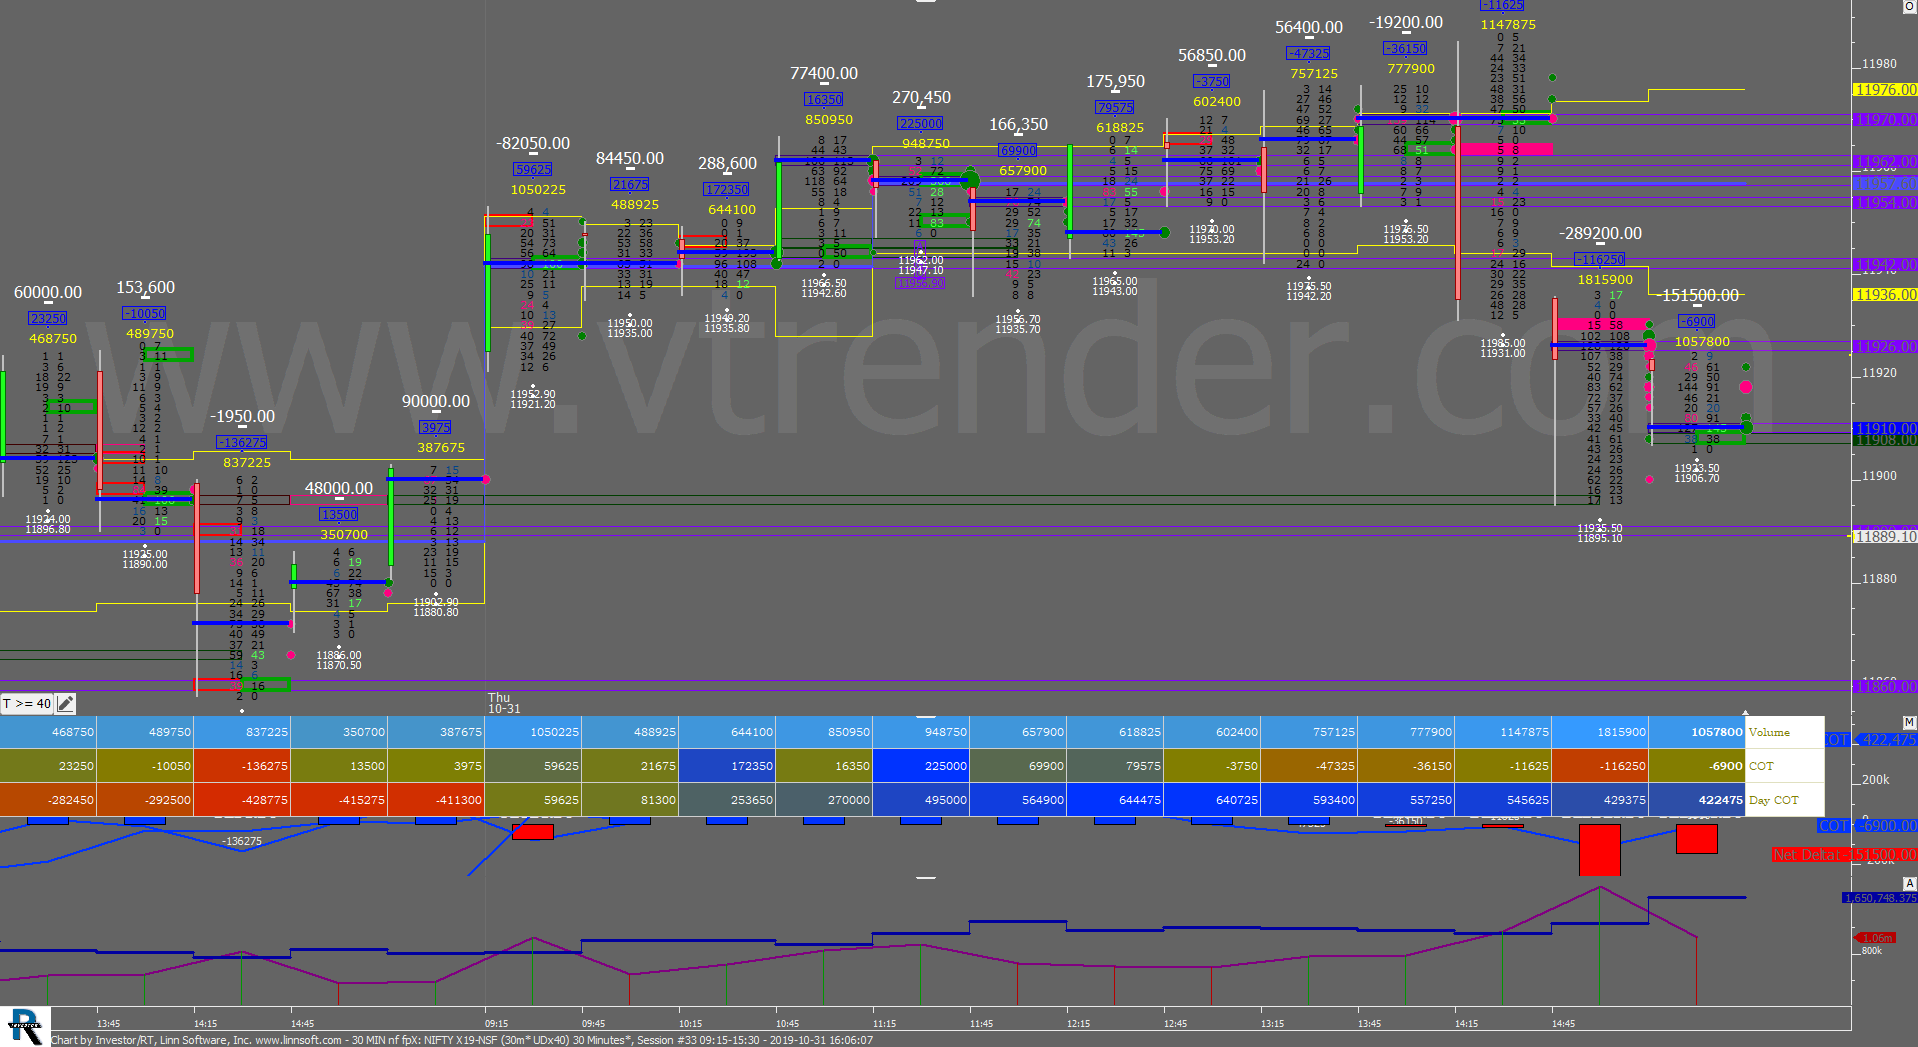 30 Min Nf Fpx 18 Order Flow Charts Dated 31St Oct Banknifty Futures, Day Trading, Intraday Trading, Intraday Trading Strategies, Nifty Futures, Order Flow Analysis, Support And Resistance, Trading Strategies, Volume Profile Trading